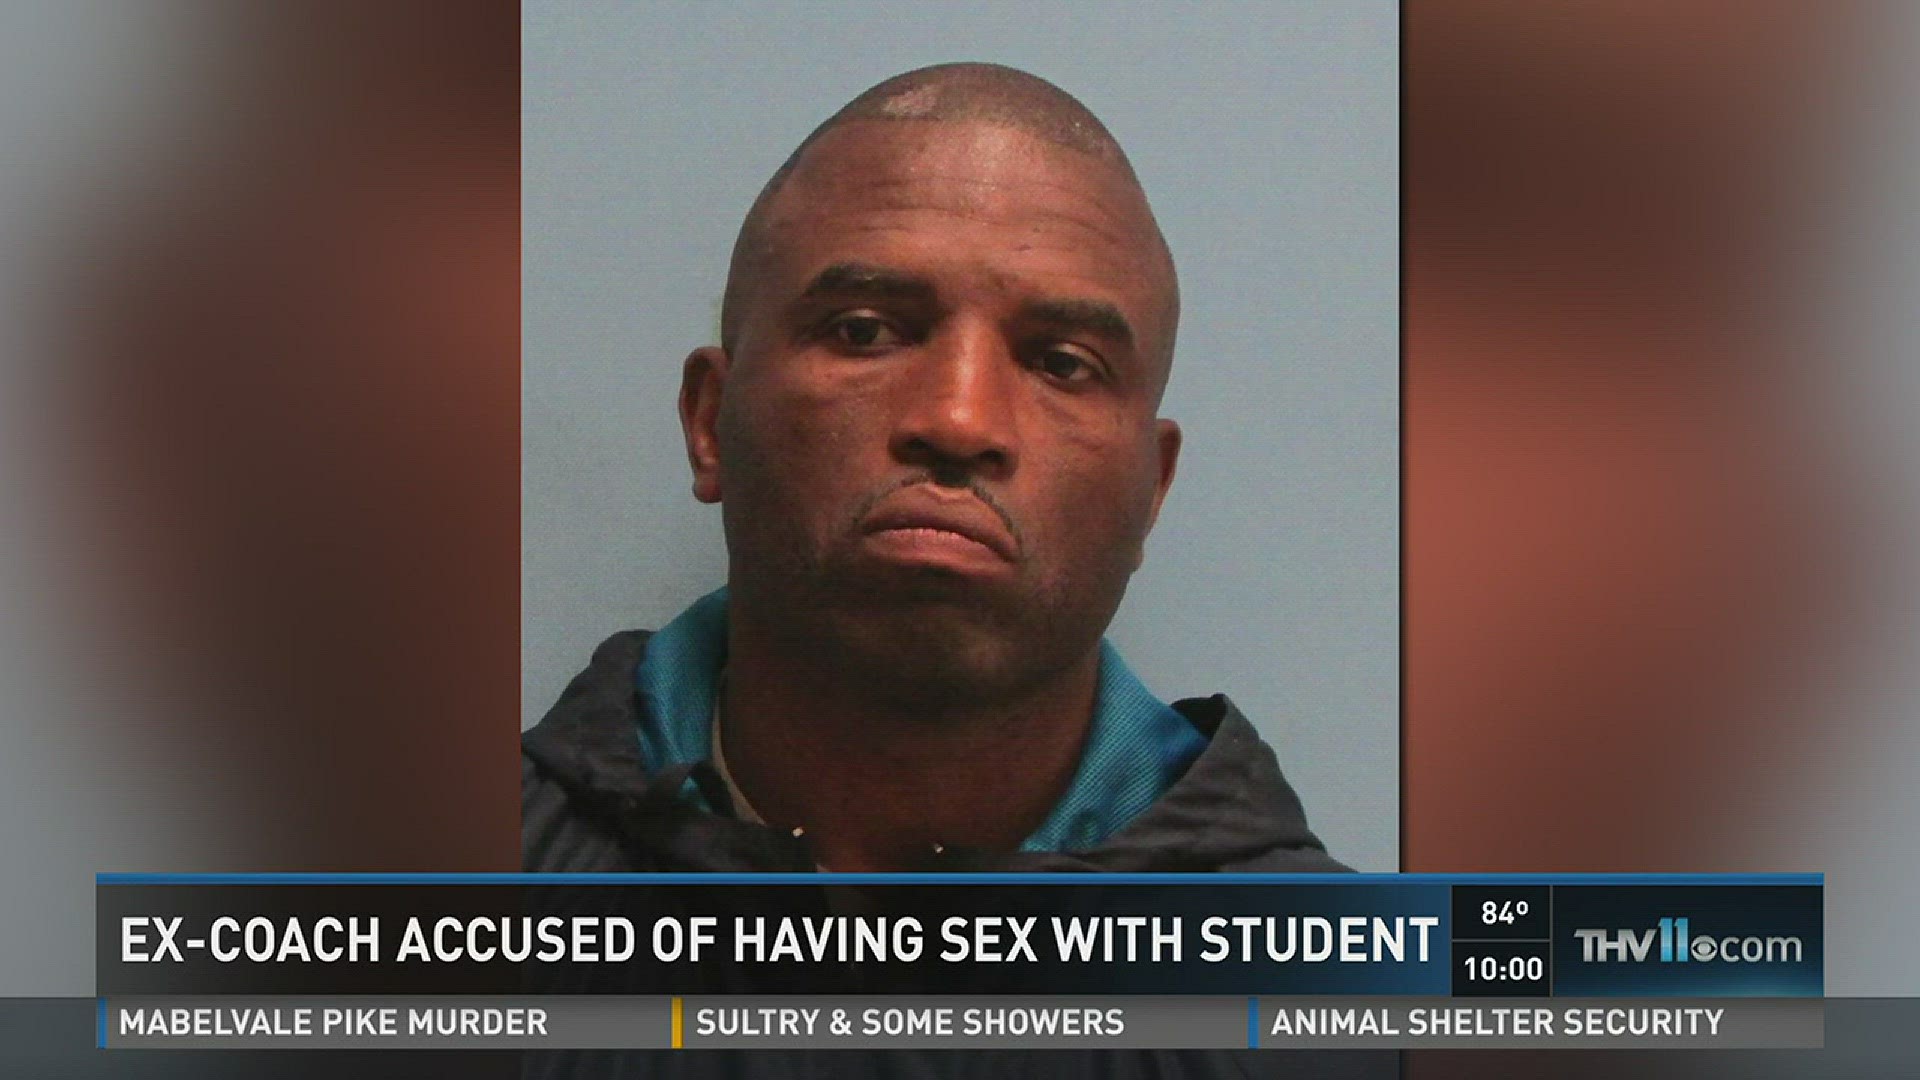 Ex-coach accused of having sex with student